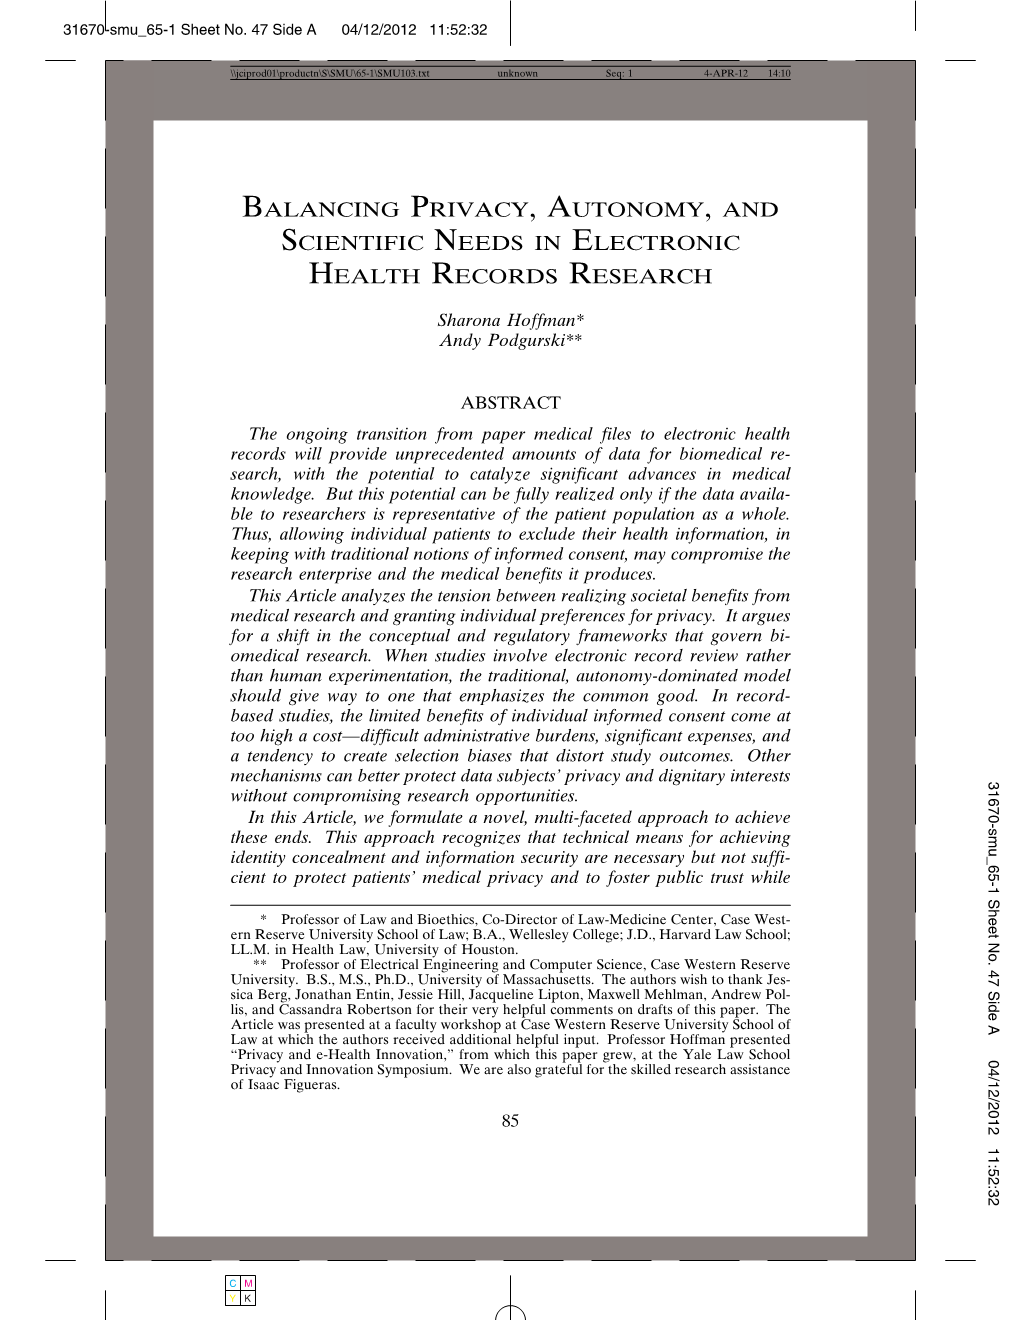 Balancing Privacy, Autonomy, and Scientific Needs in Electronic